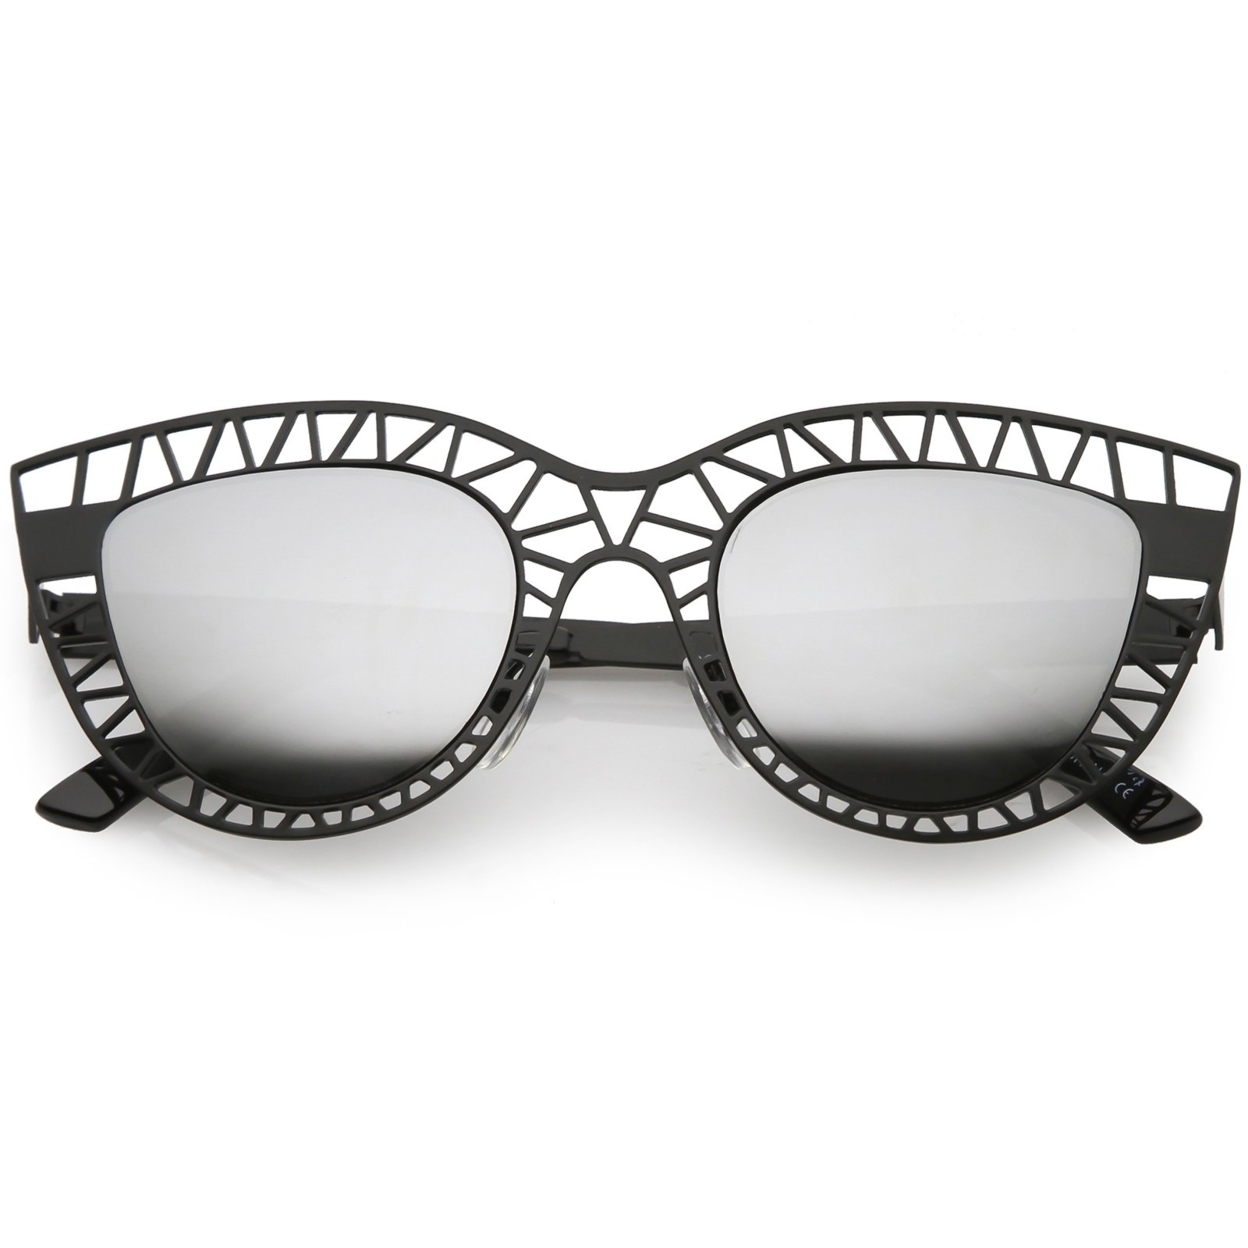 Unique Laser Cut Out Cat Eye Sunglasses With Color Mirrored Lens 48mm - Matte Black / Pink Mirror